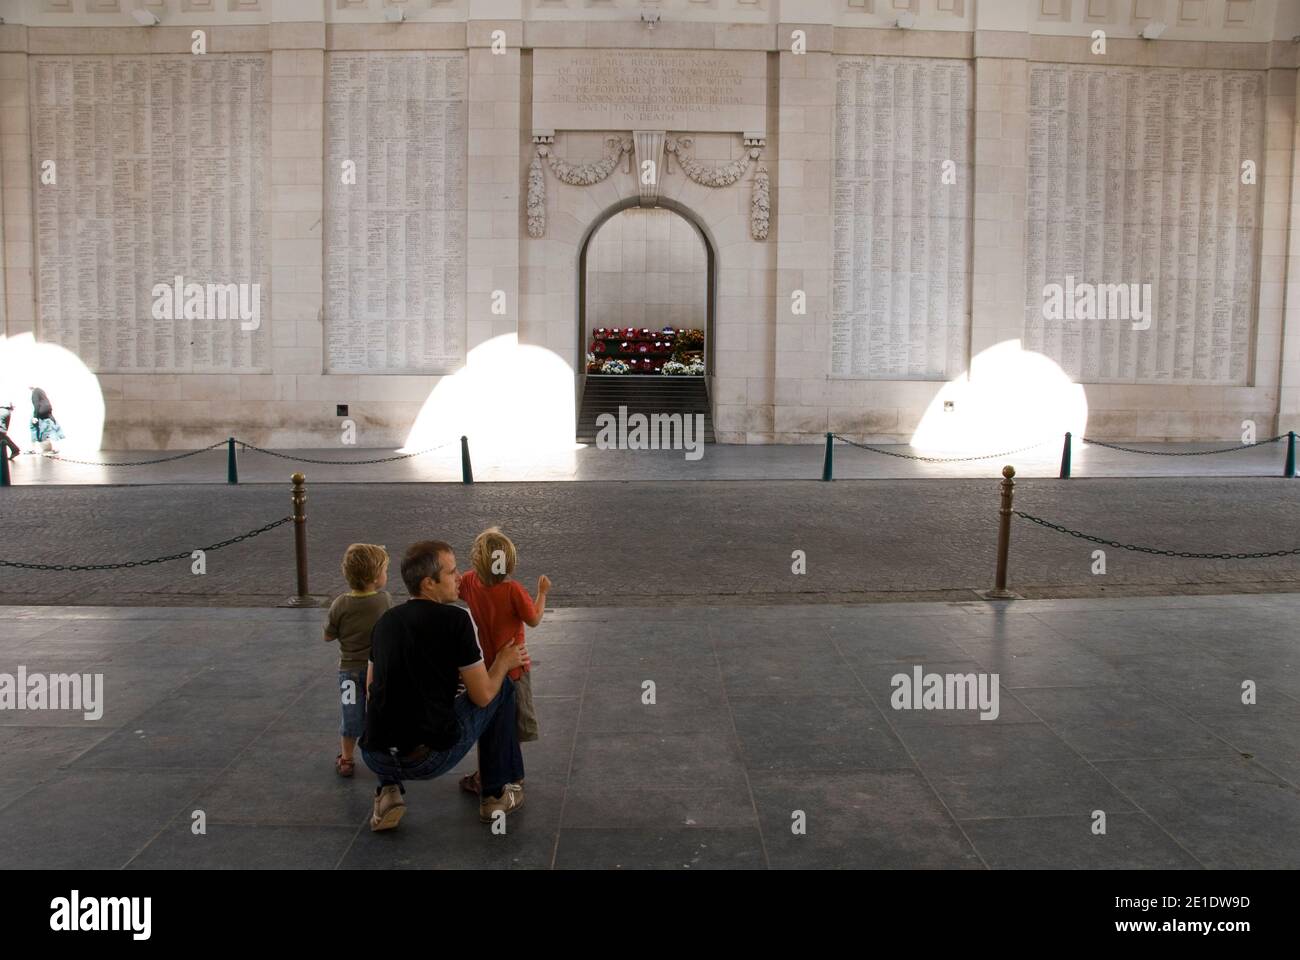 Names etched in walls of the Menin Gate Memorial to the Missing, a memorial to British World War 1 soldiers whose graves are unknown, Ypres, Belgium. Stock Photo